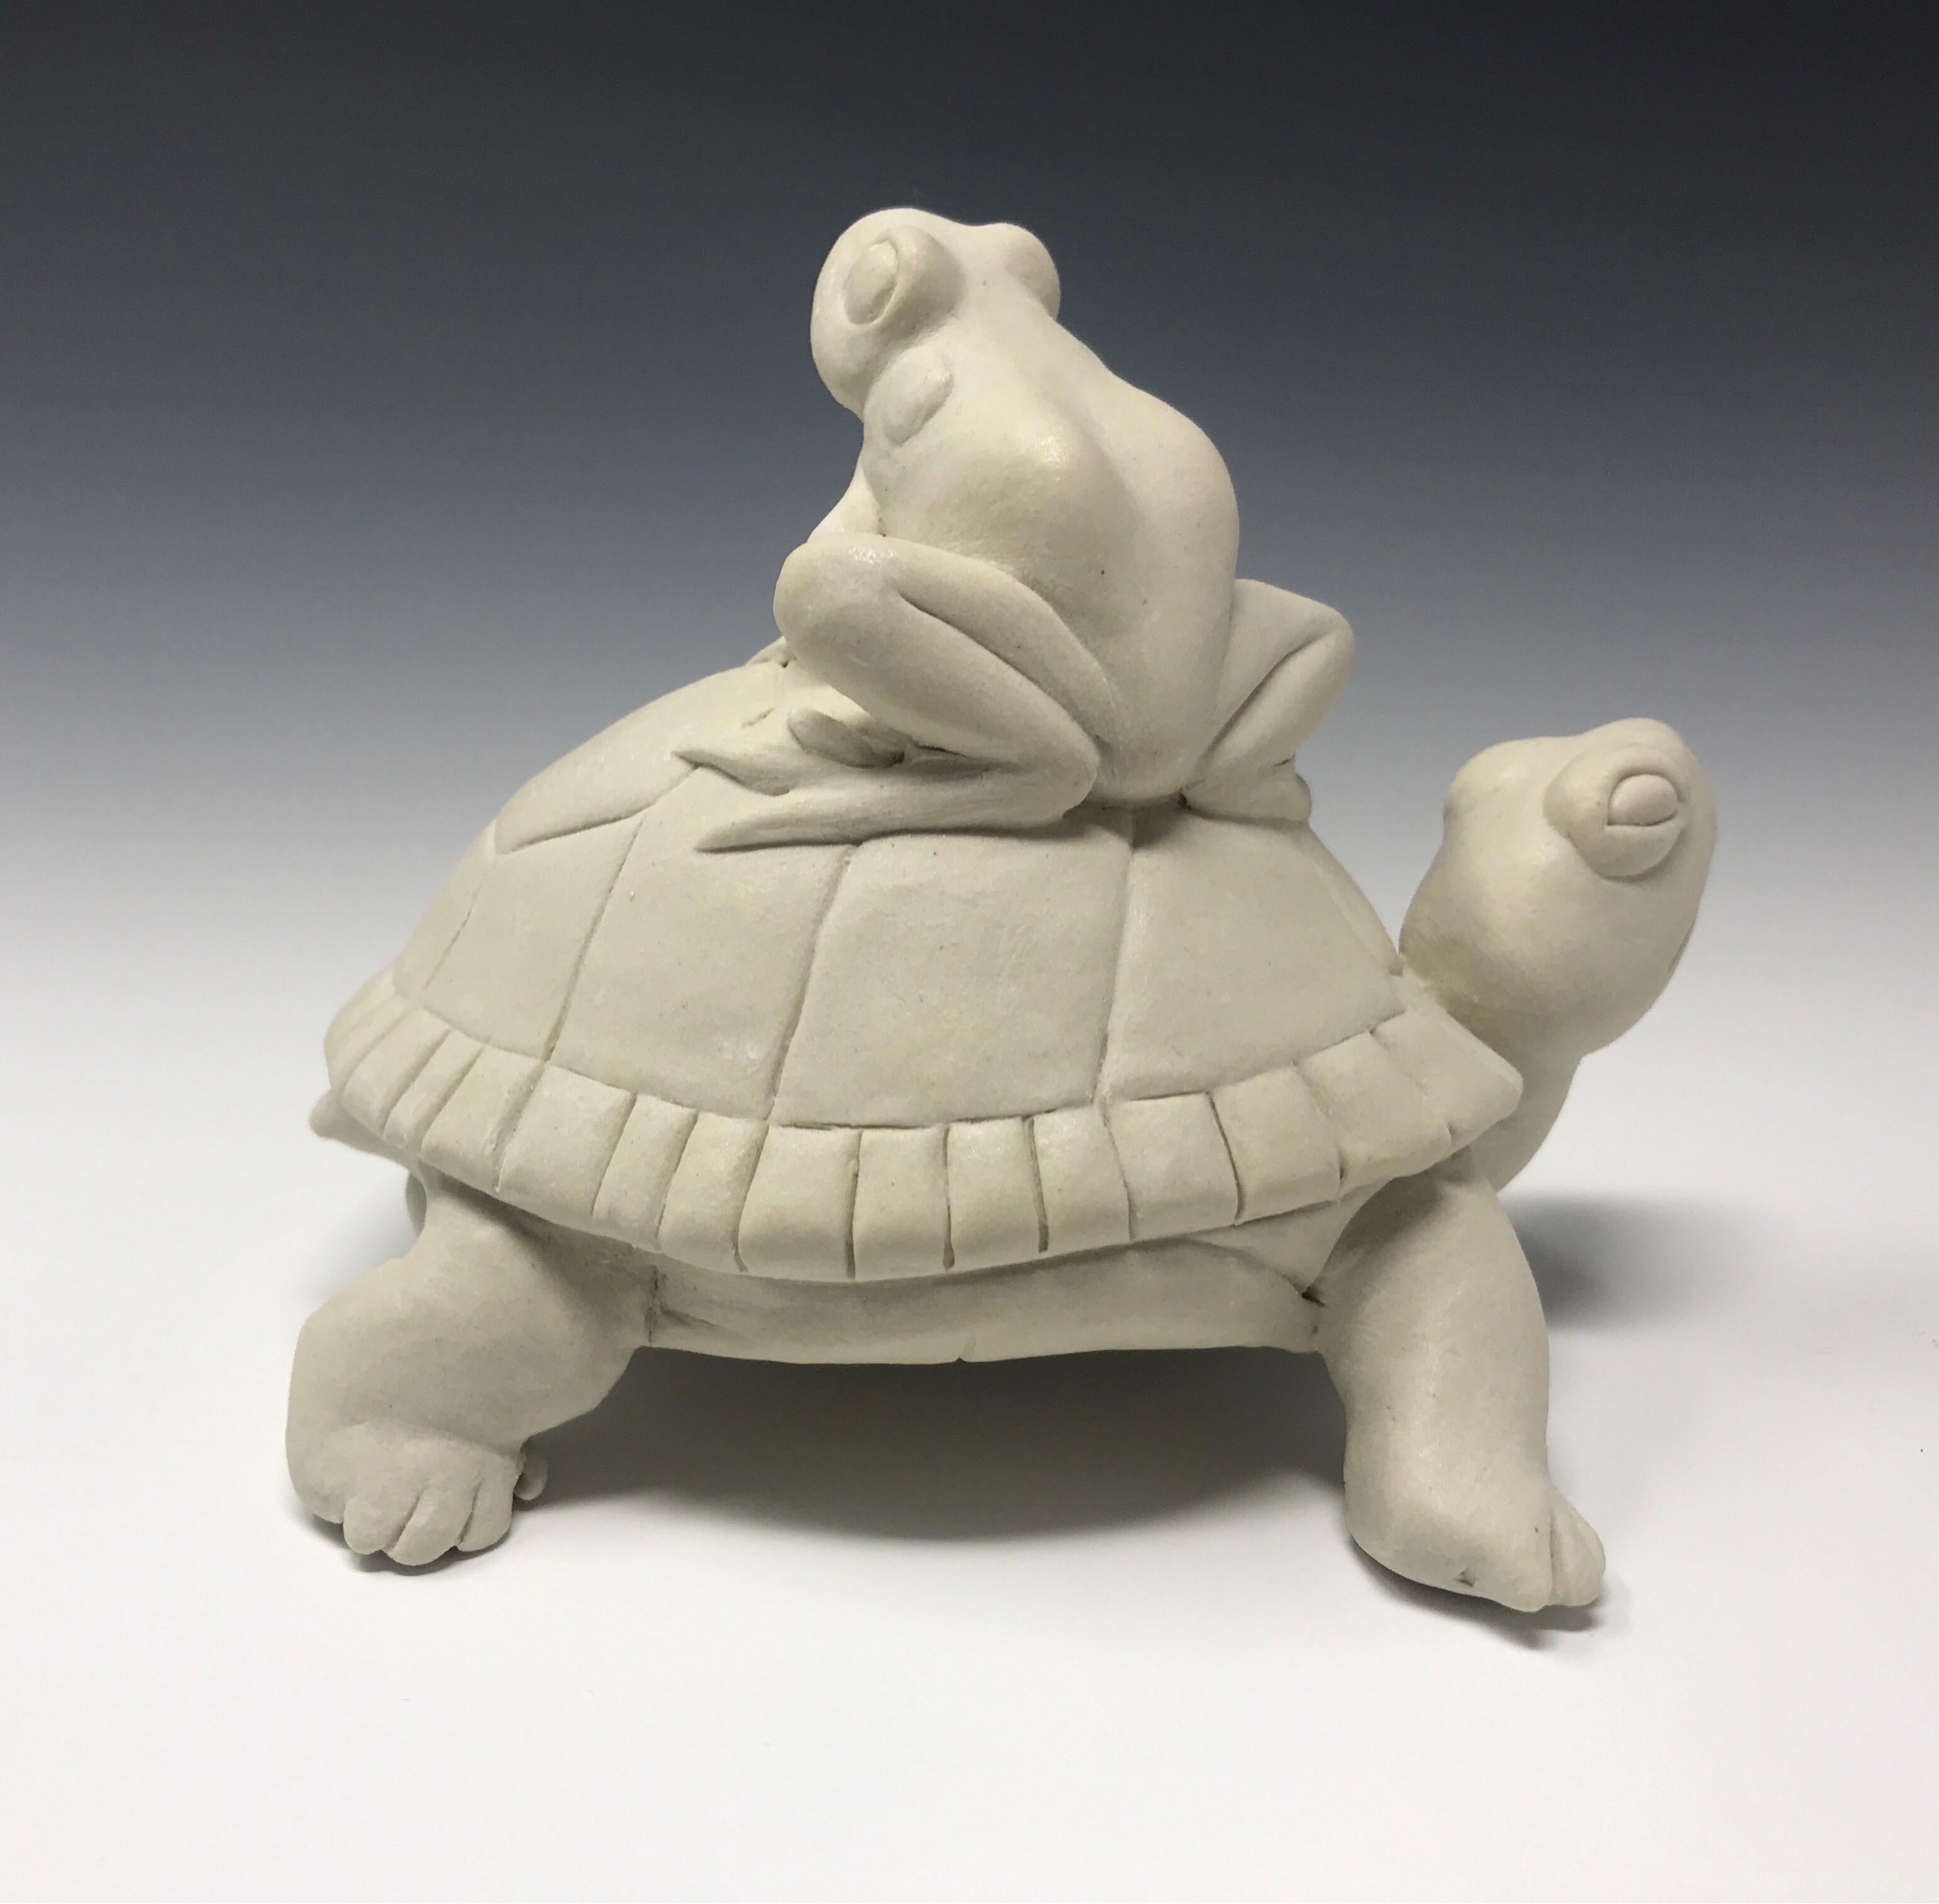 This hand built ceramic frog and turtle pairing was hand sculpted without the use of molds by New York artist, Bethany Krull.  The study of reptilian and amphibian form is also a commentary on solidarity amidst diversity. A study for a larger